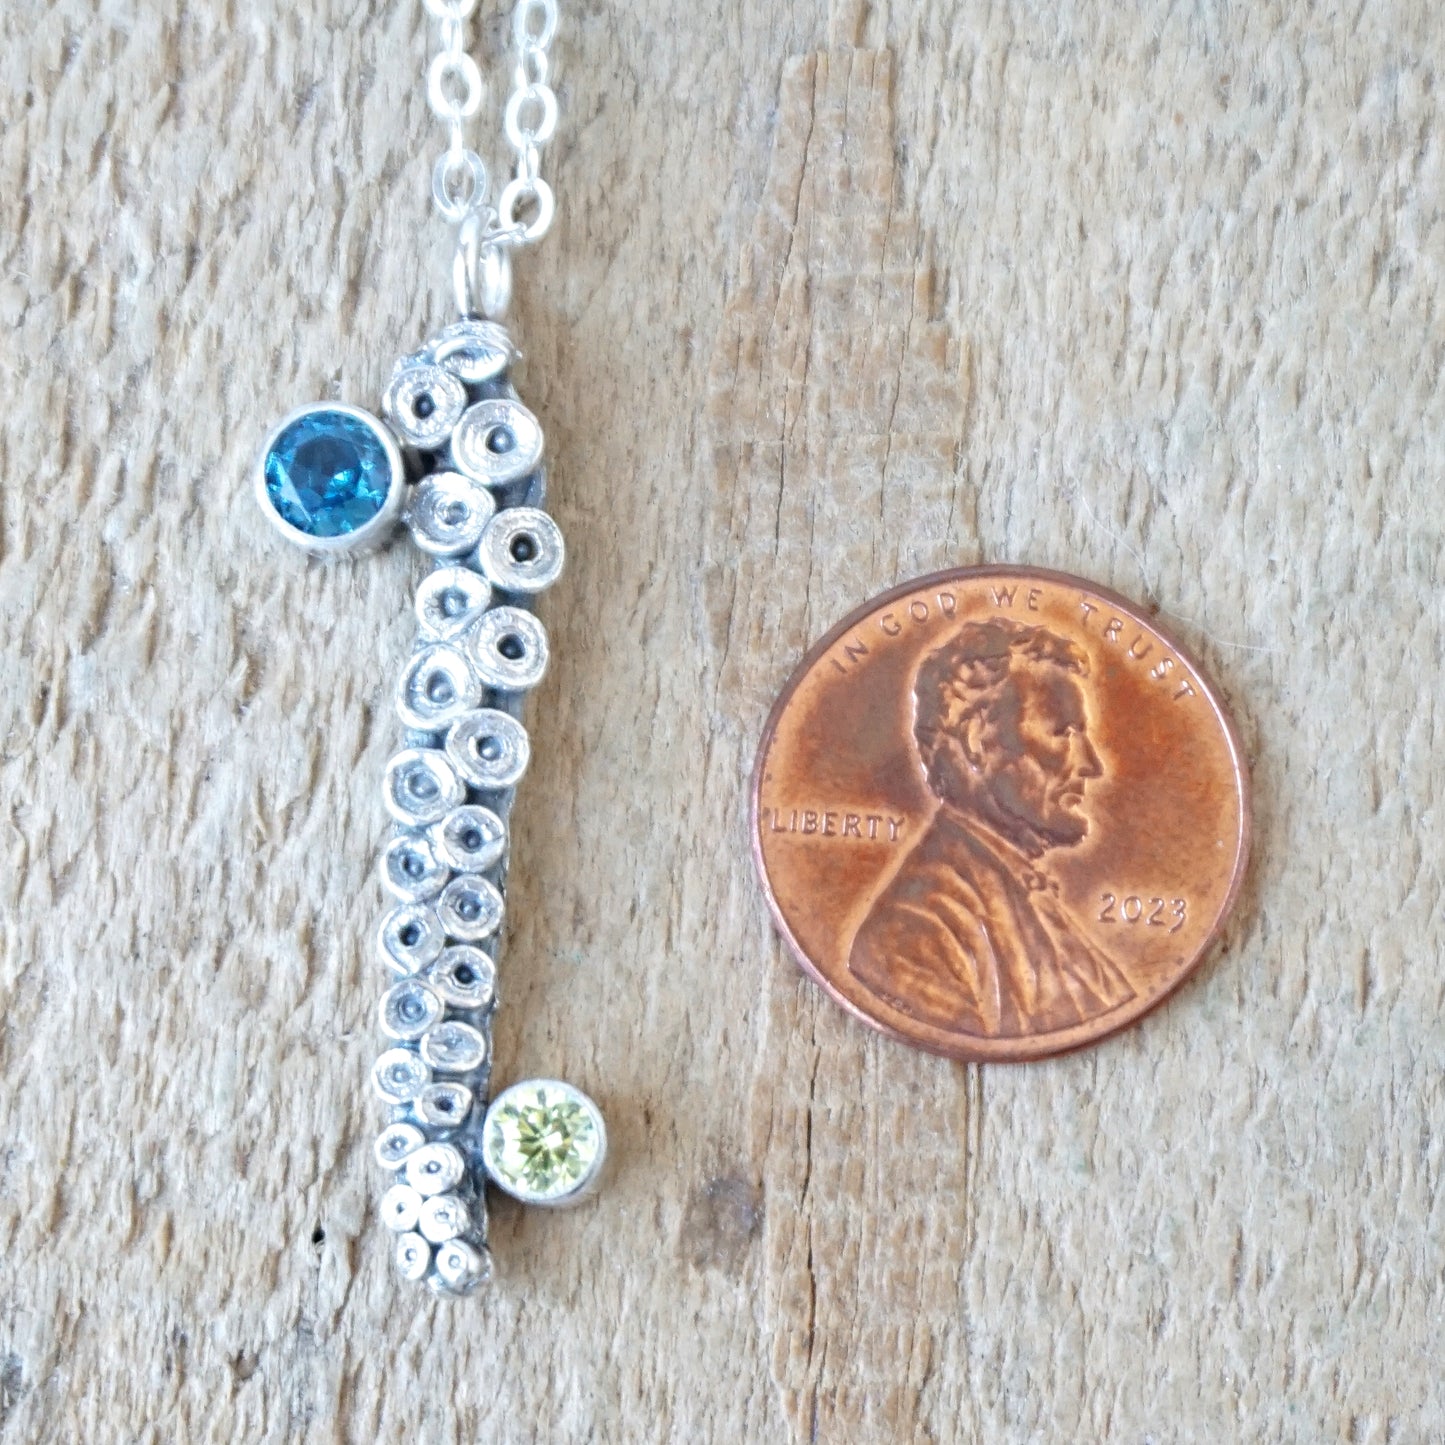 Sterling Silver Octopus Tentacle and Topaz Blue and Peridiot Green Cubic Zirconia Pendant